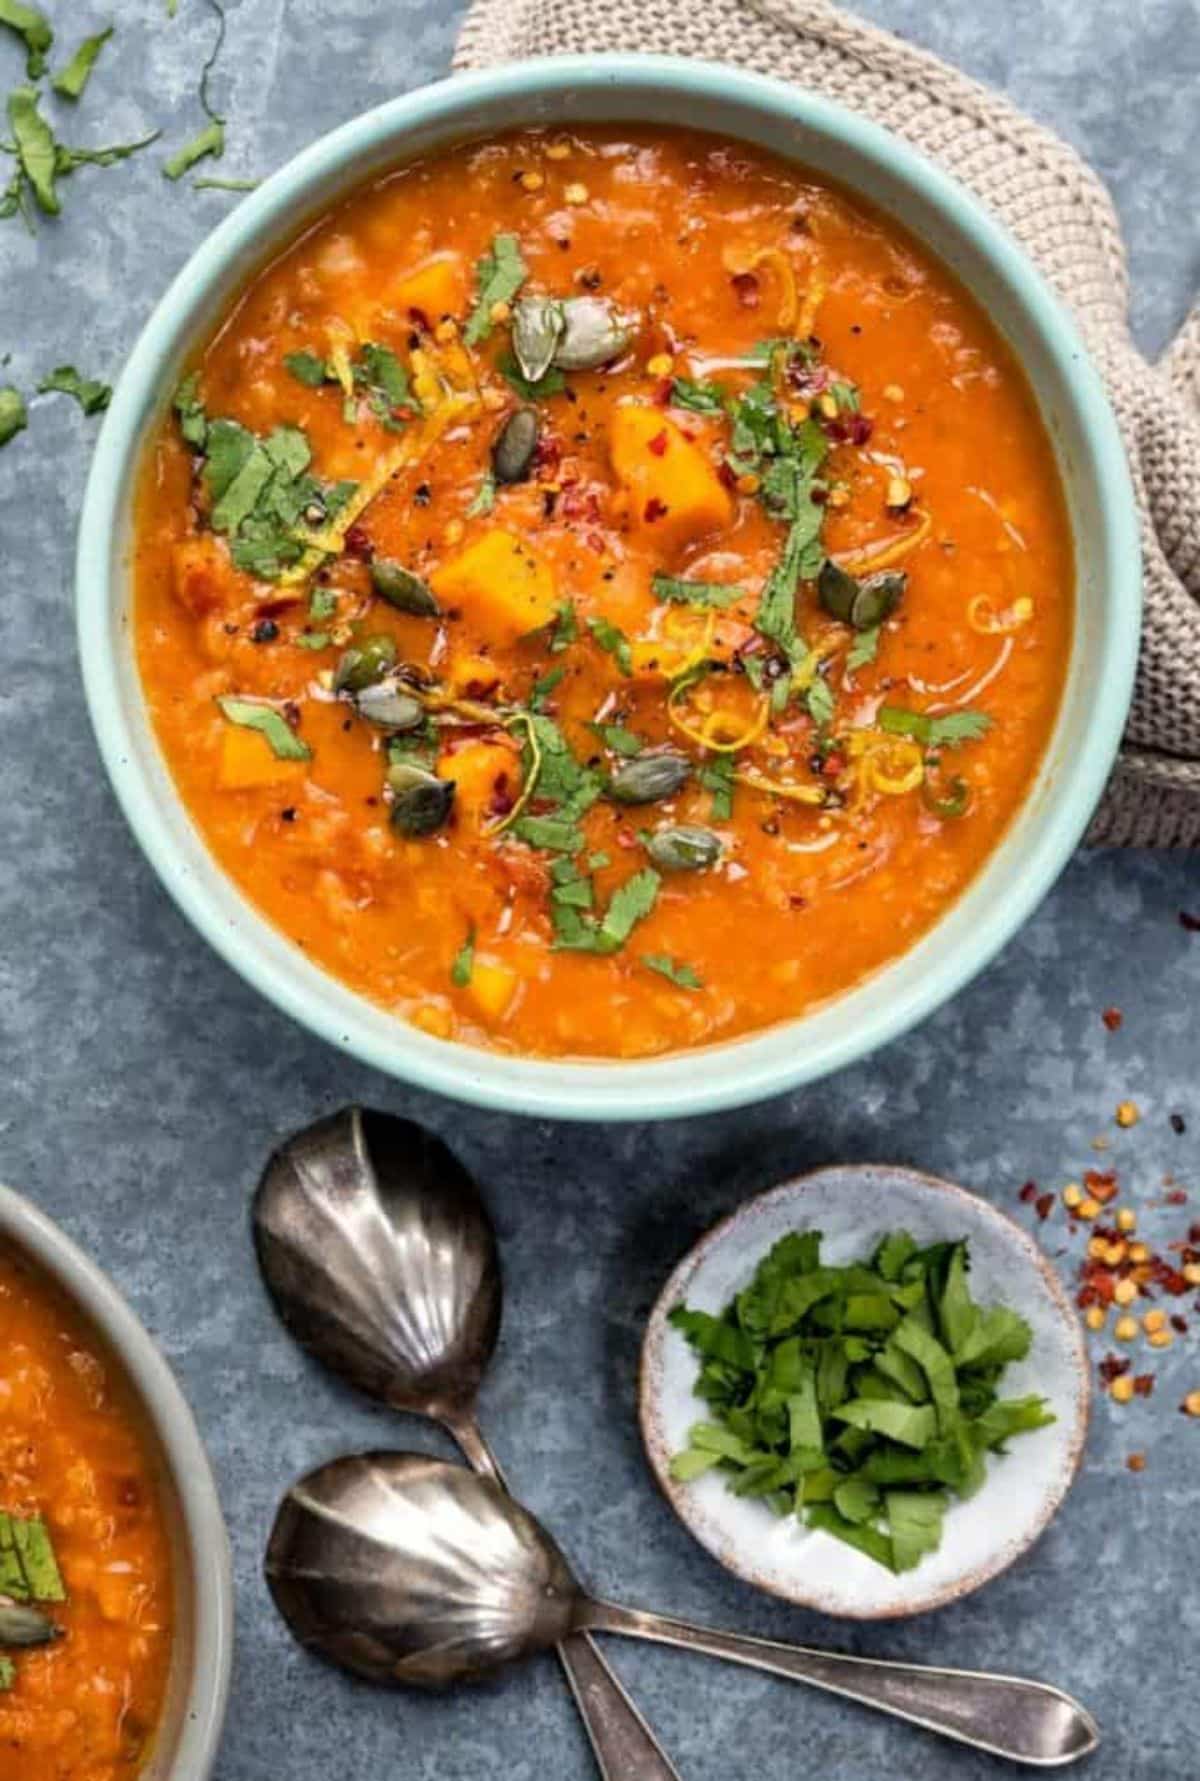 Creamy Sweet Potato, Chickpea, and Red Lentil Soup in a blue bowl.